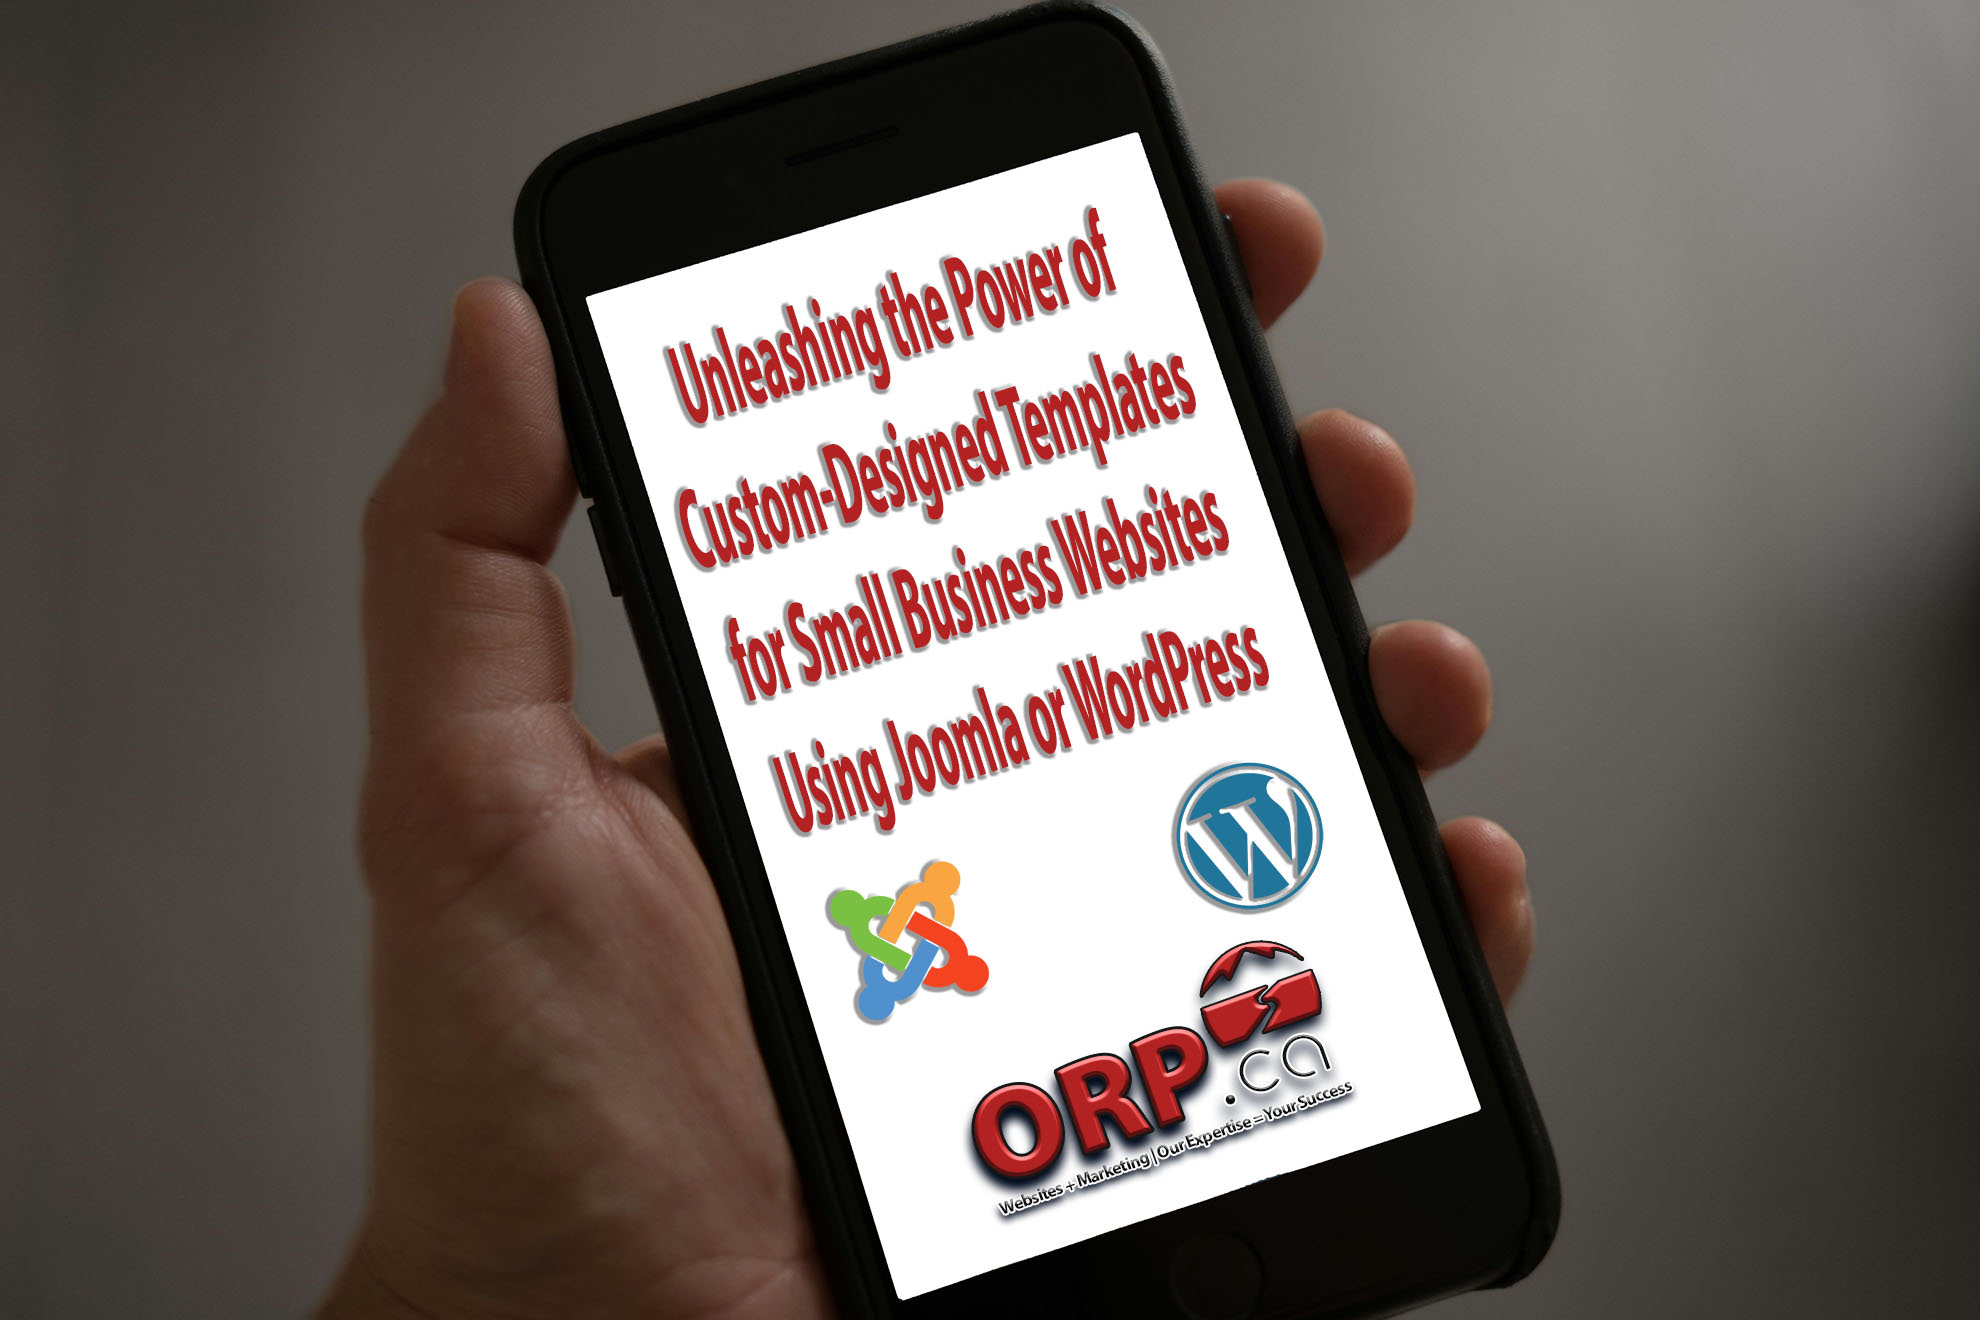 Unleashing the Power of Custom Designed Templates for Small Business Websites Using Joomla or WordPress - a small business website design and development article from ORP.ca, Your Small Business Website and Digital Marketing Services Provide